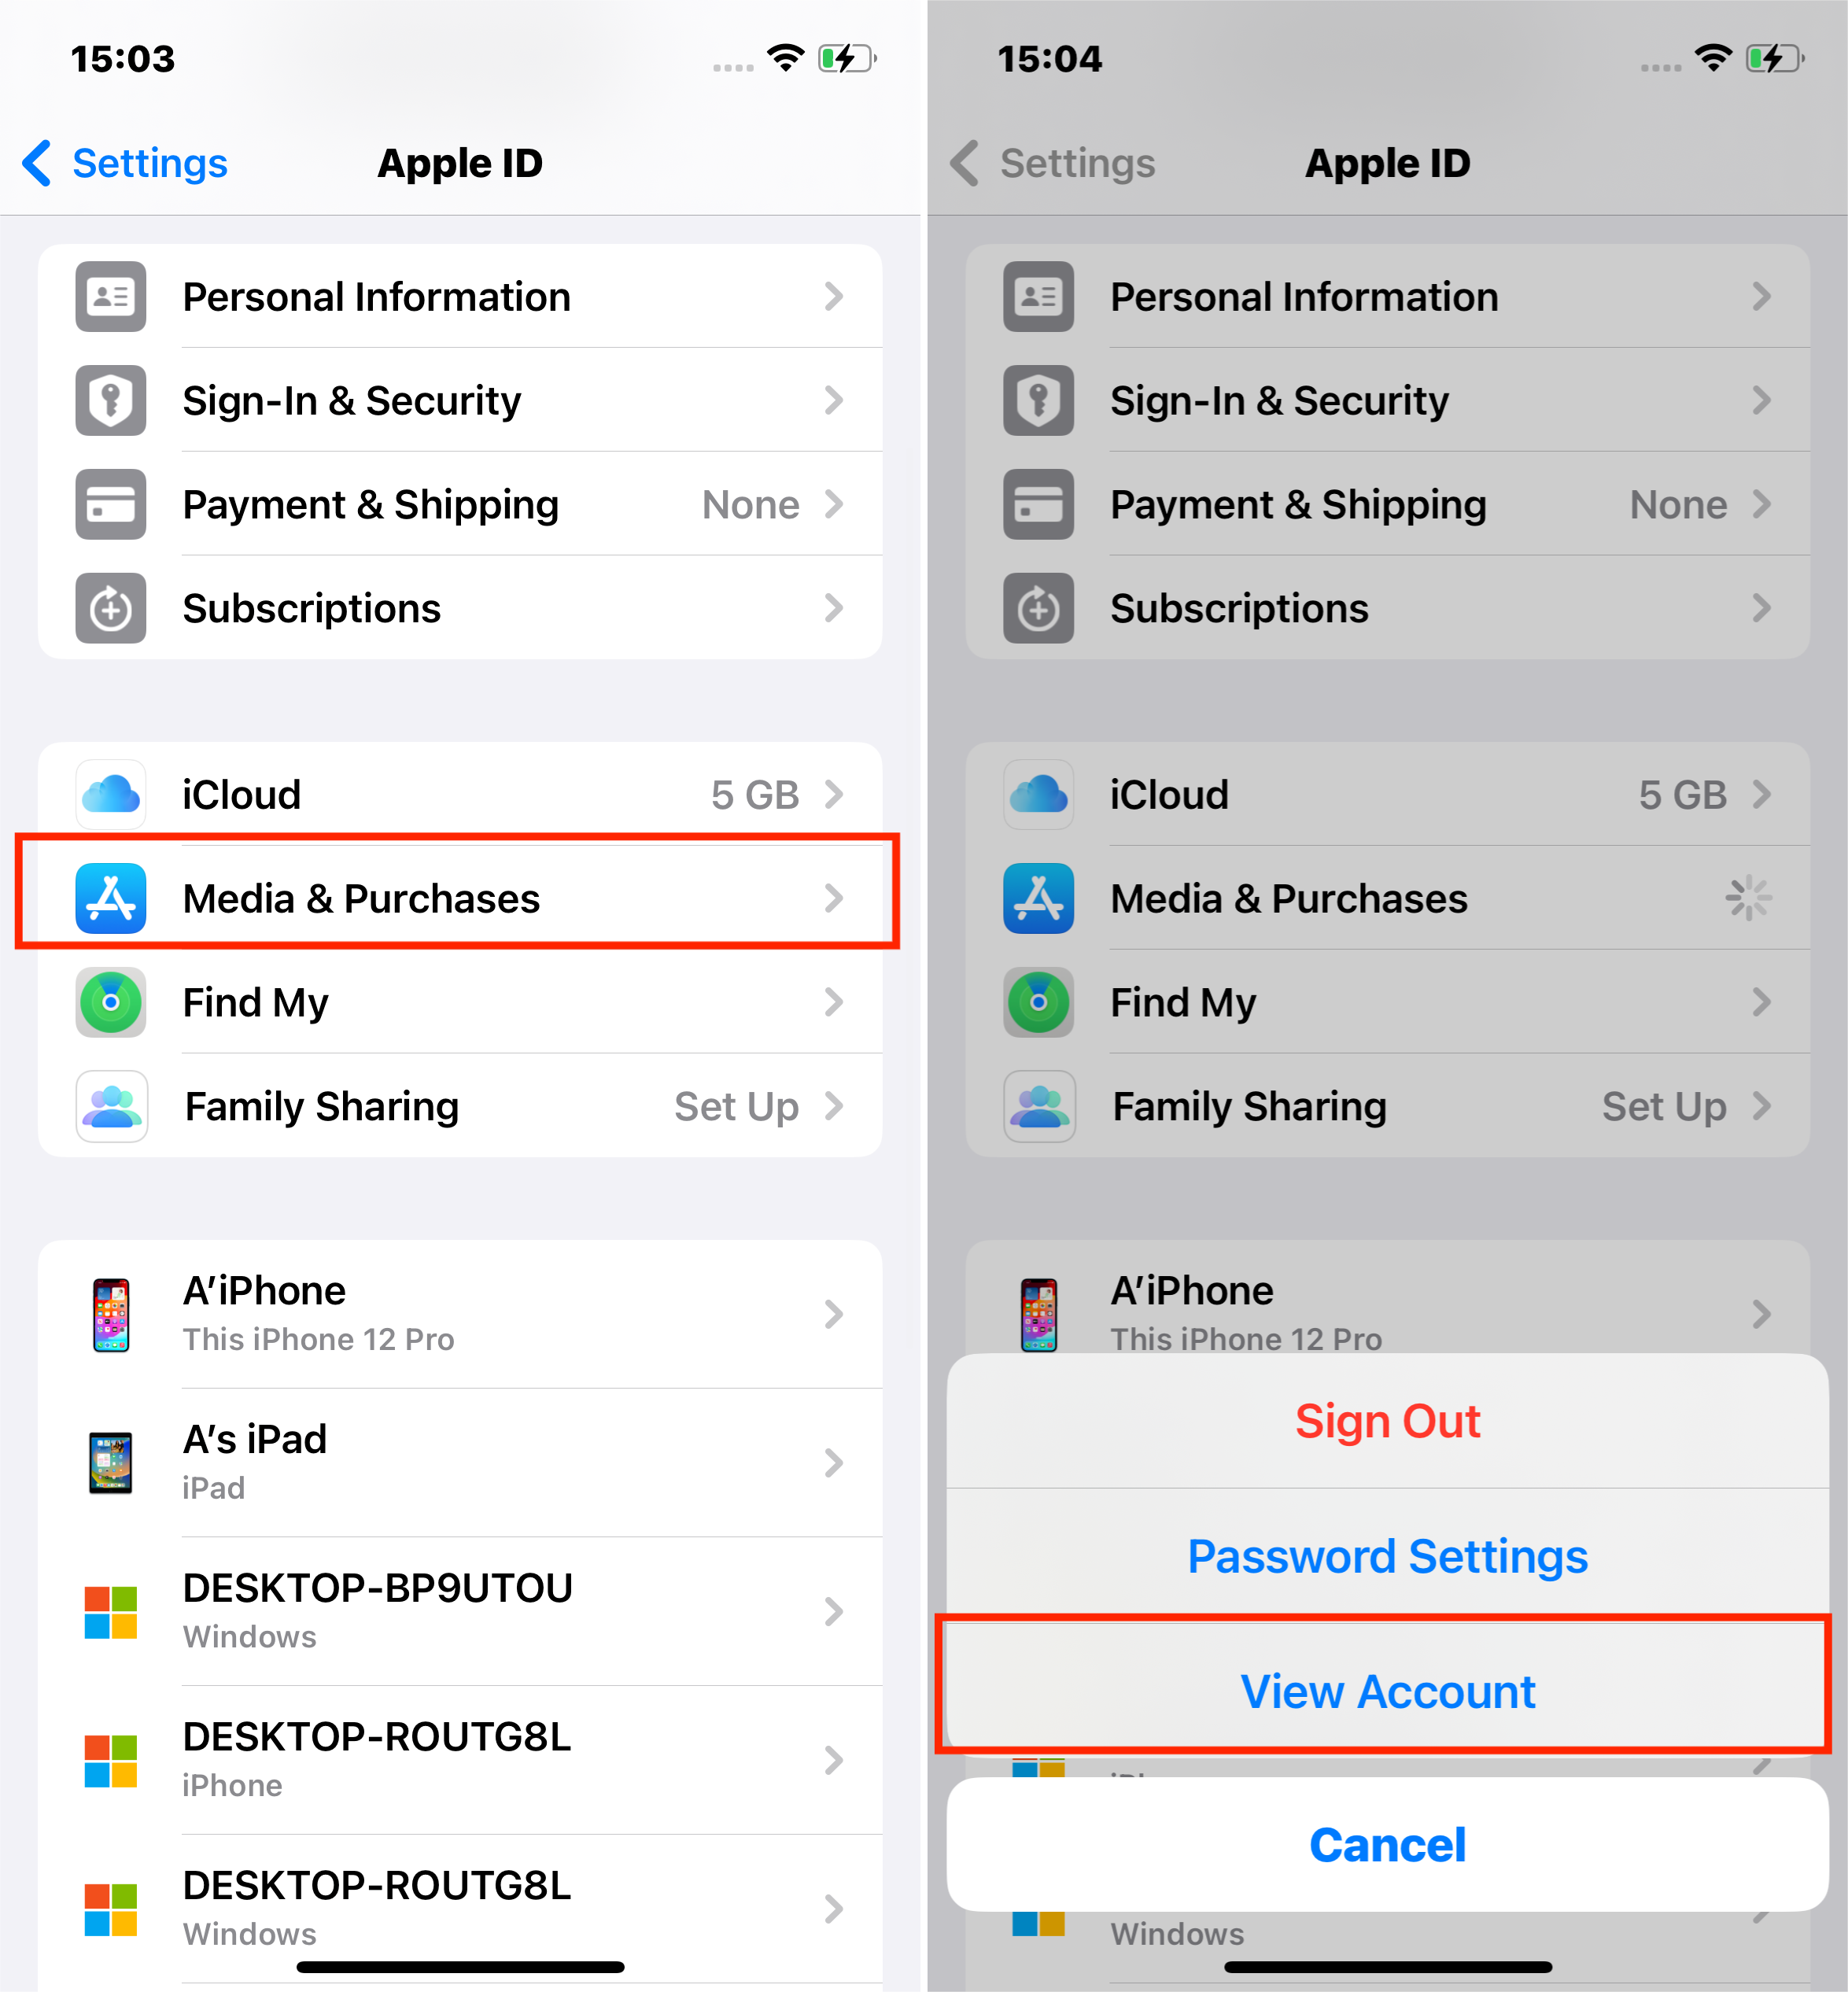 Steps to View Media and Purchases Account via iPhone Settings